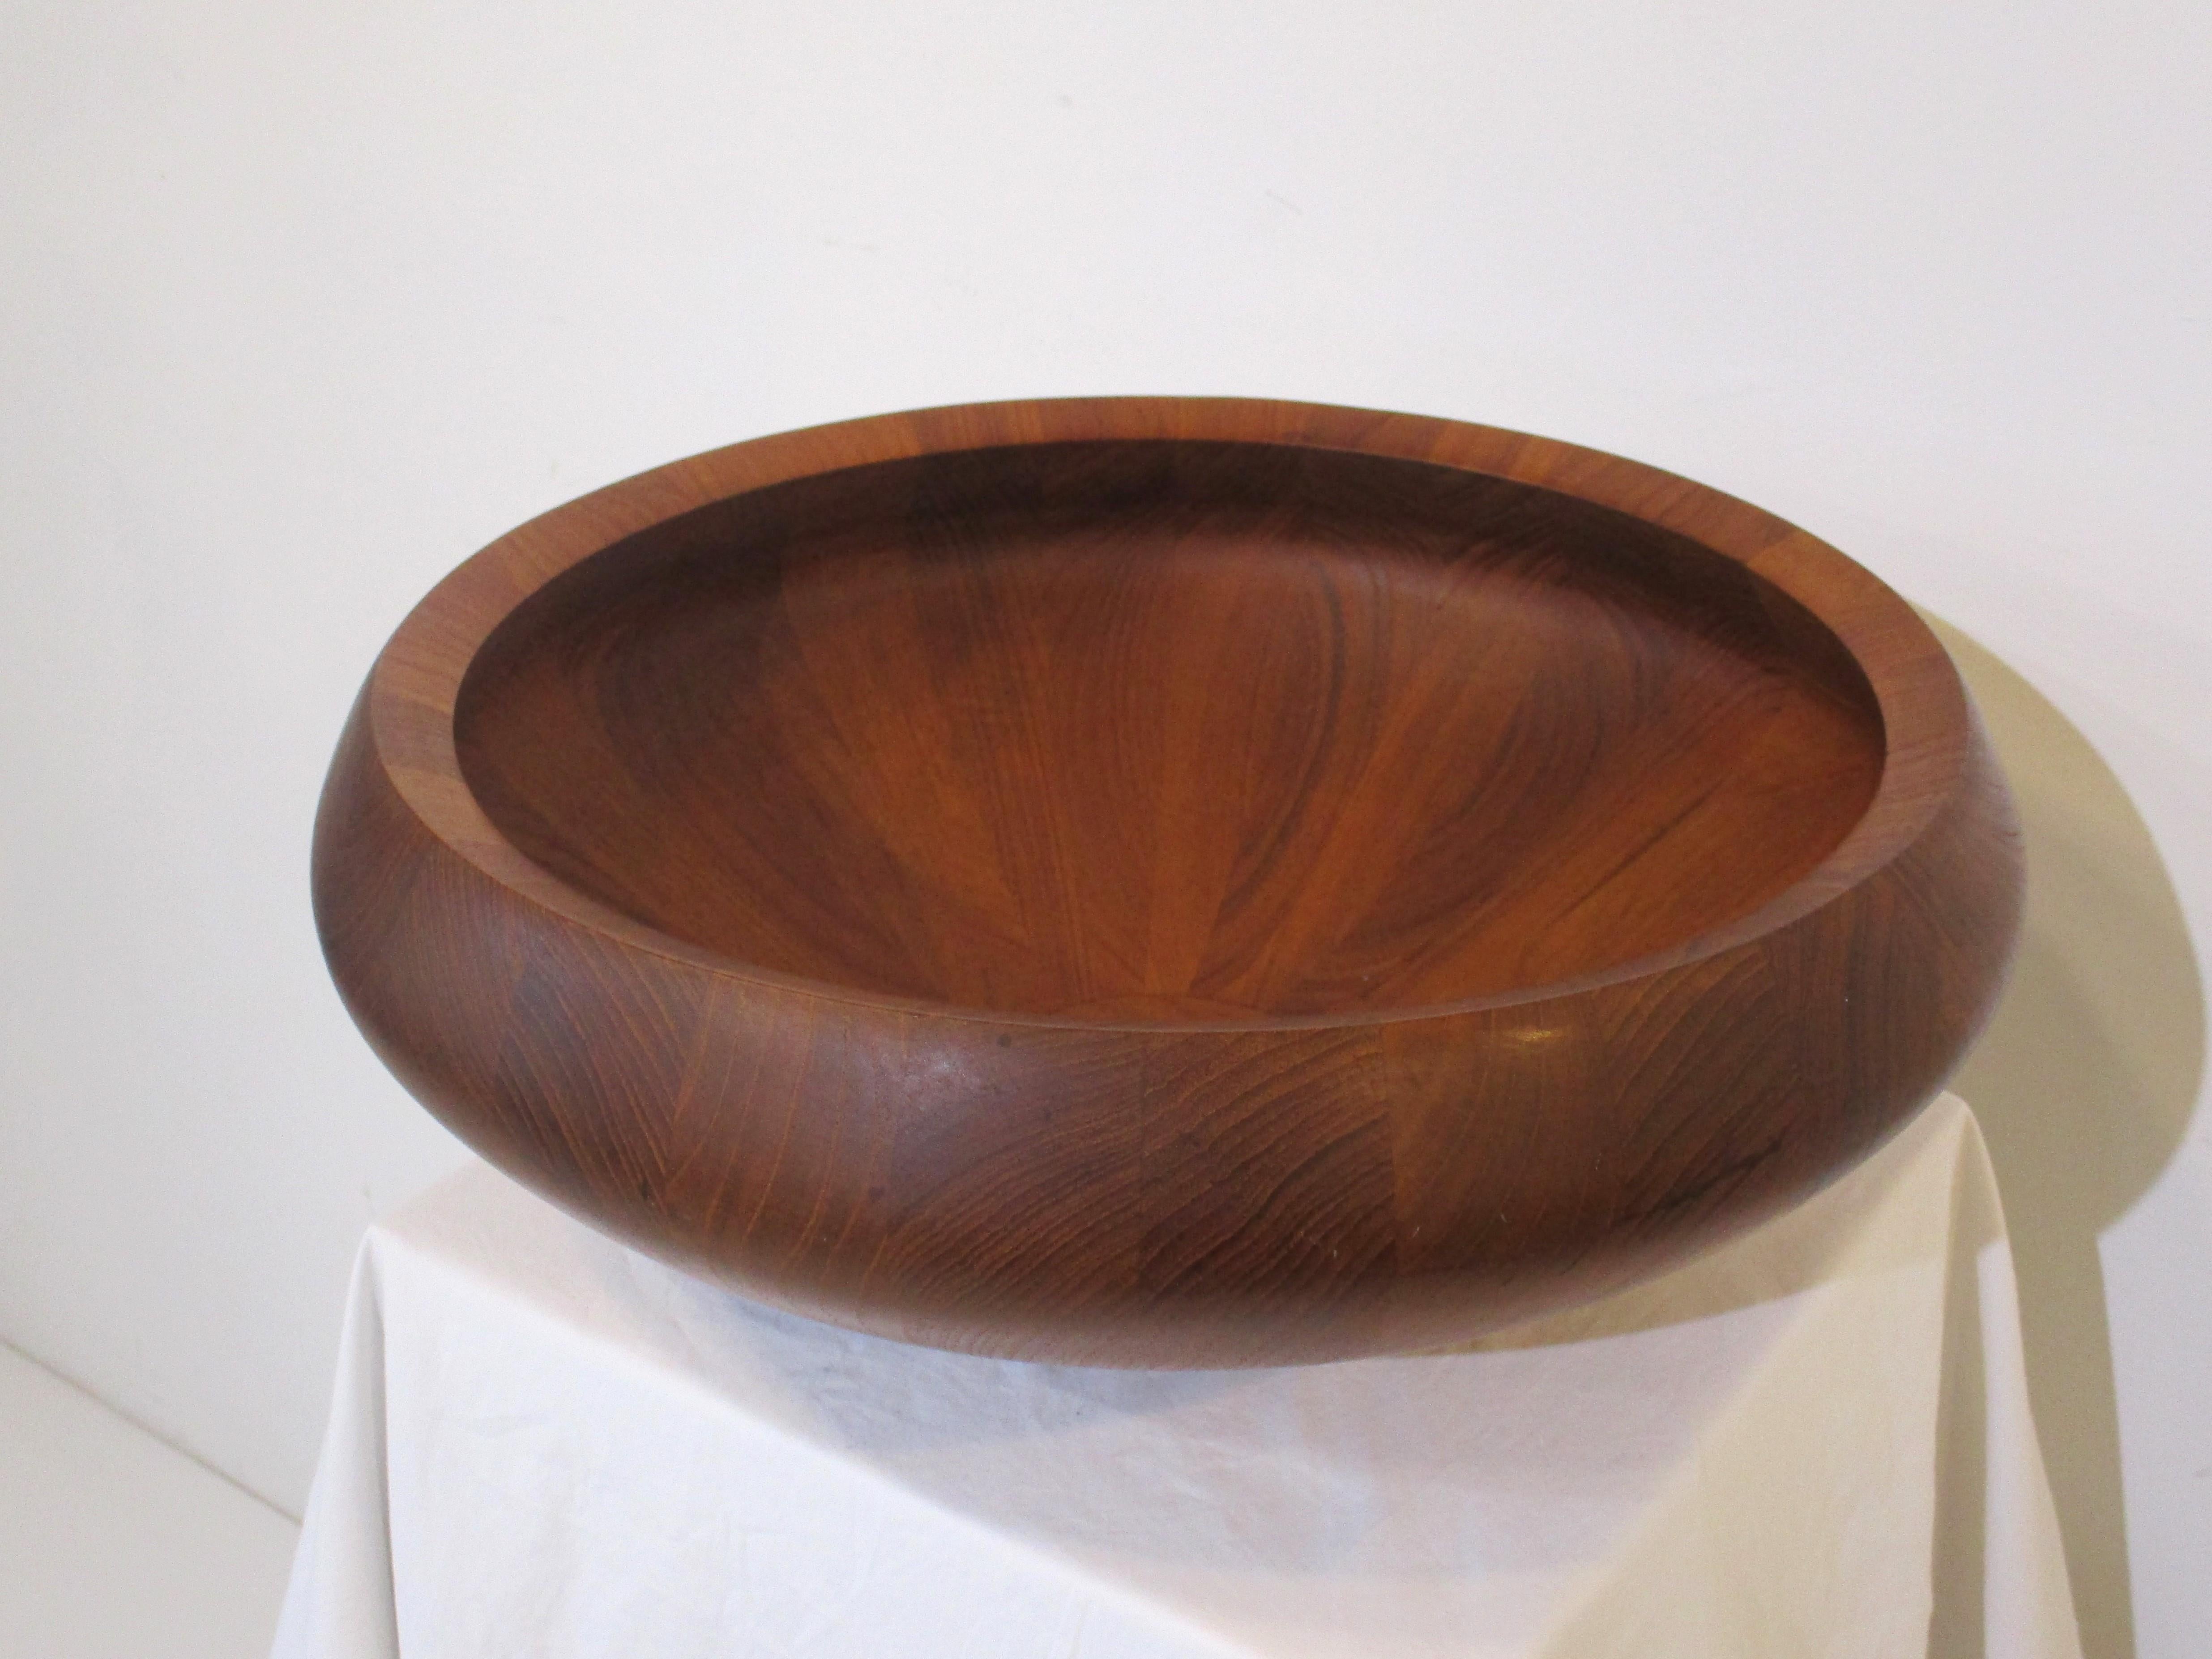 A large Mid Century staved teak center piece or serving bowl with rounded edges and beveled top rim . Early production with the three duck mark and branded Dansk manufactures mark , a great piece for the table or kitchen made in Denmark . 